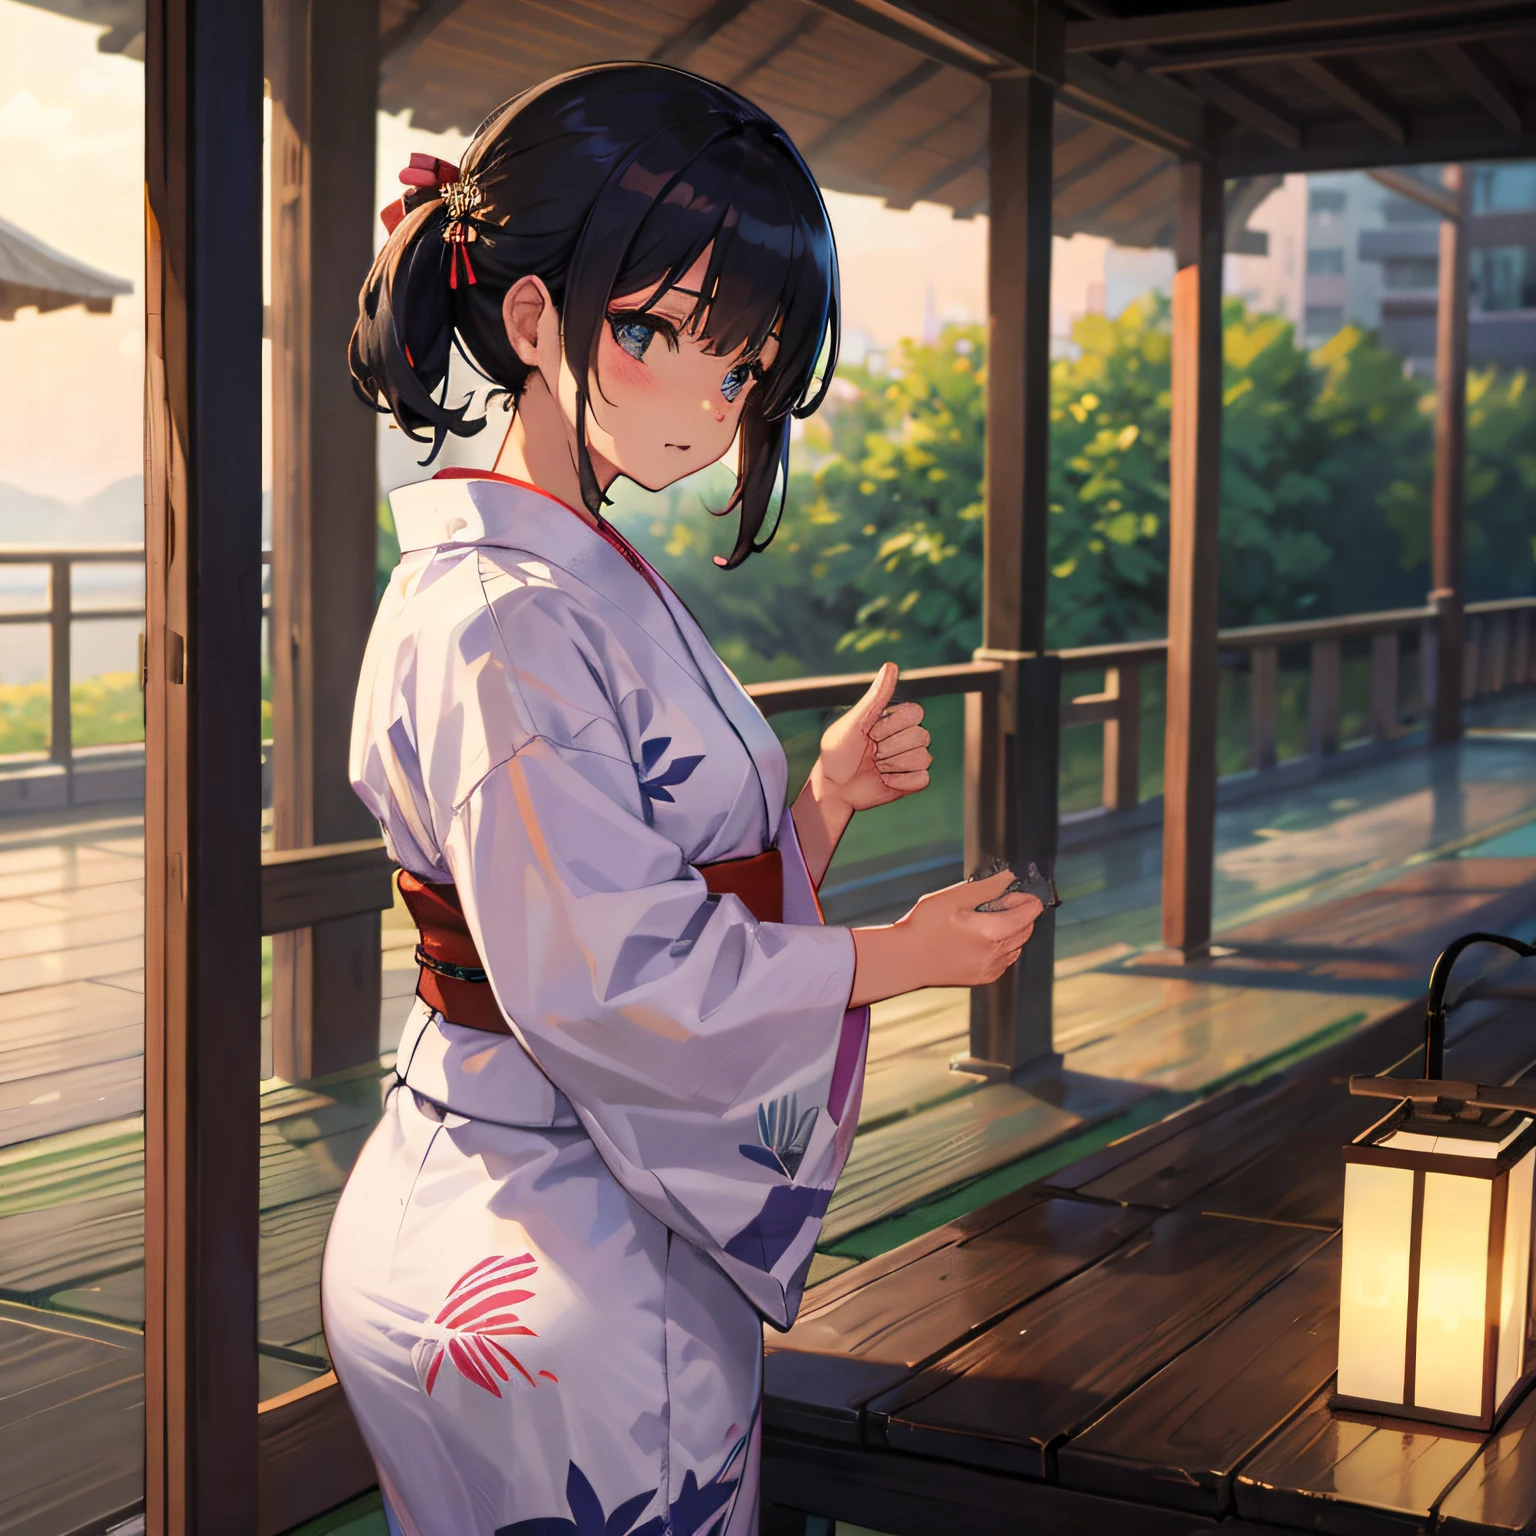 anime girl in kimono outfit standing on a deck looking at her cell phone, in a kimono, anime style 4 k, in kimono, artwork in the style of guweiz, anime moe artstyle, anime art wallpaper 8 k, 4k anime wallpaper, anime wallpaper 4k, anime wallpaper 4 k, anime art wallpaper 4k, anime art wallpaper 4 k